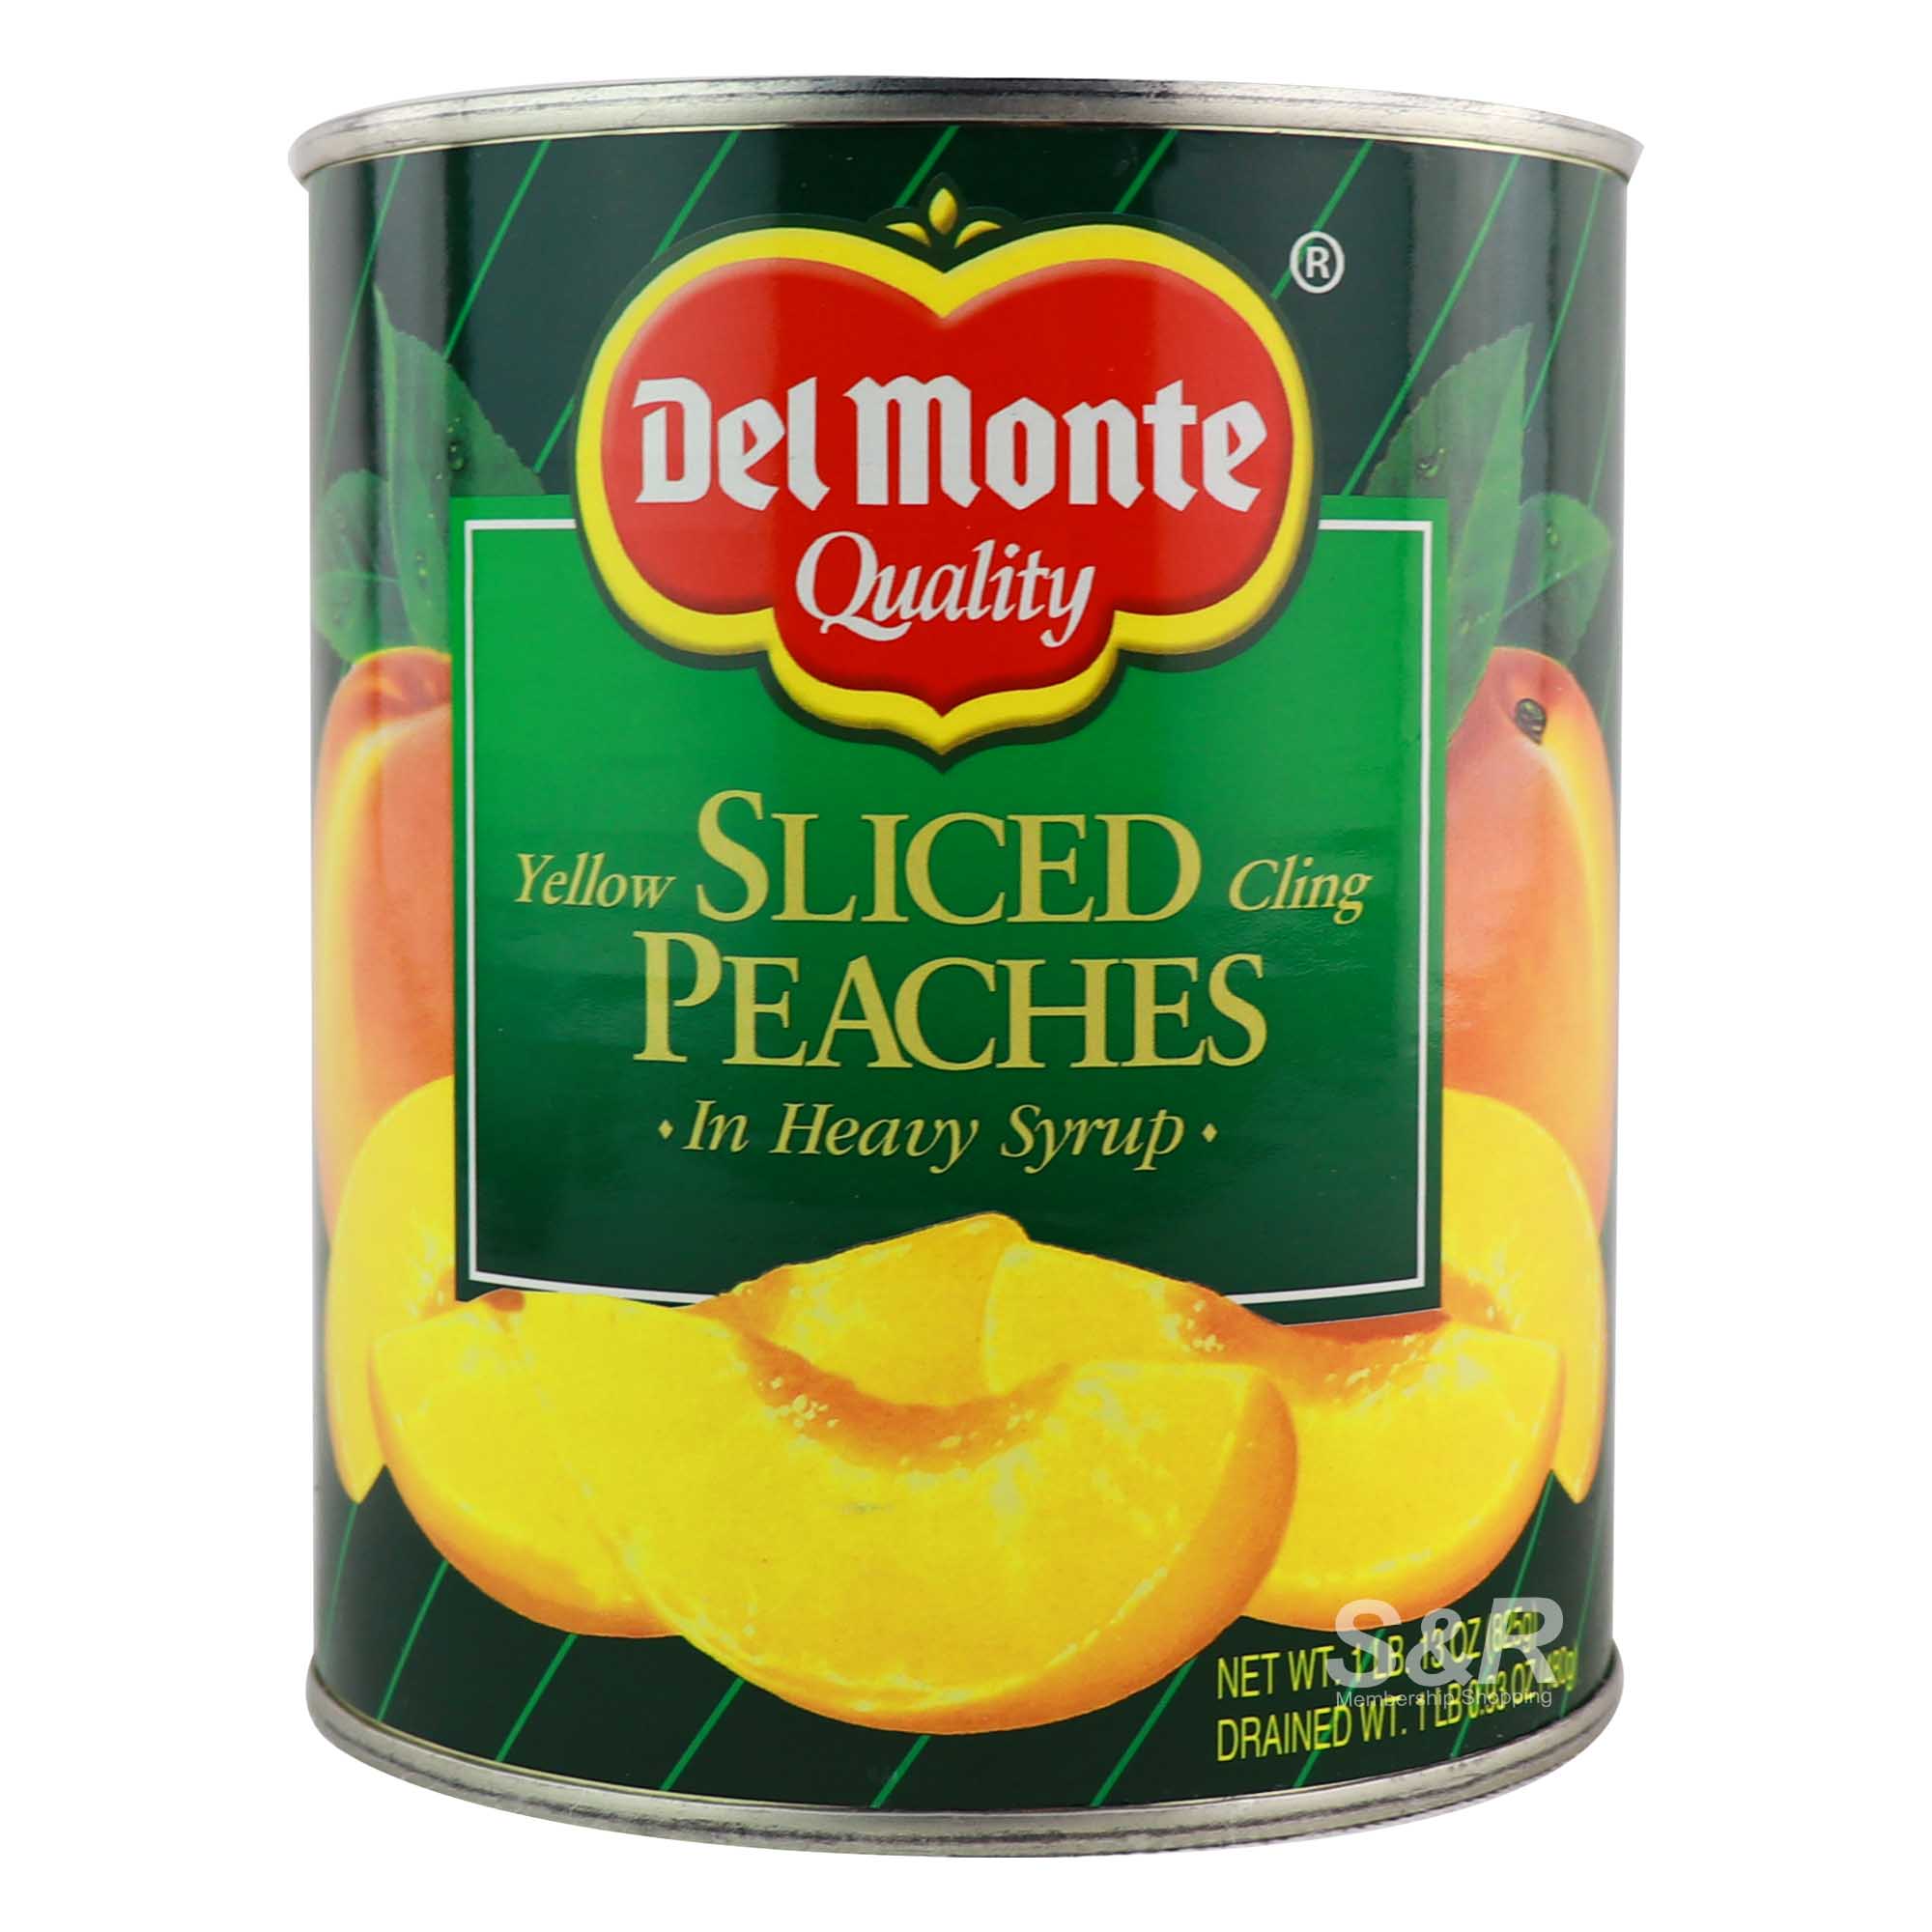 Del Monte Sliced Peaches in Heavy Syrup 825g